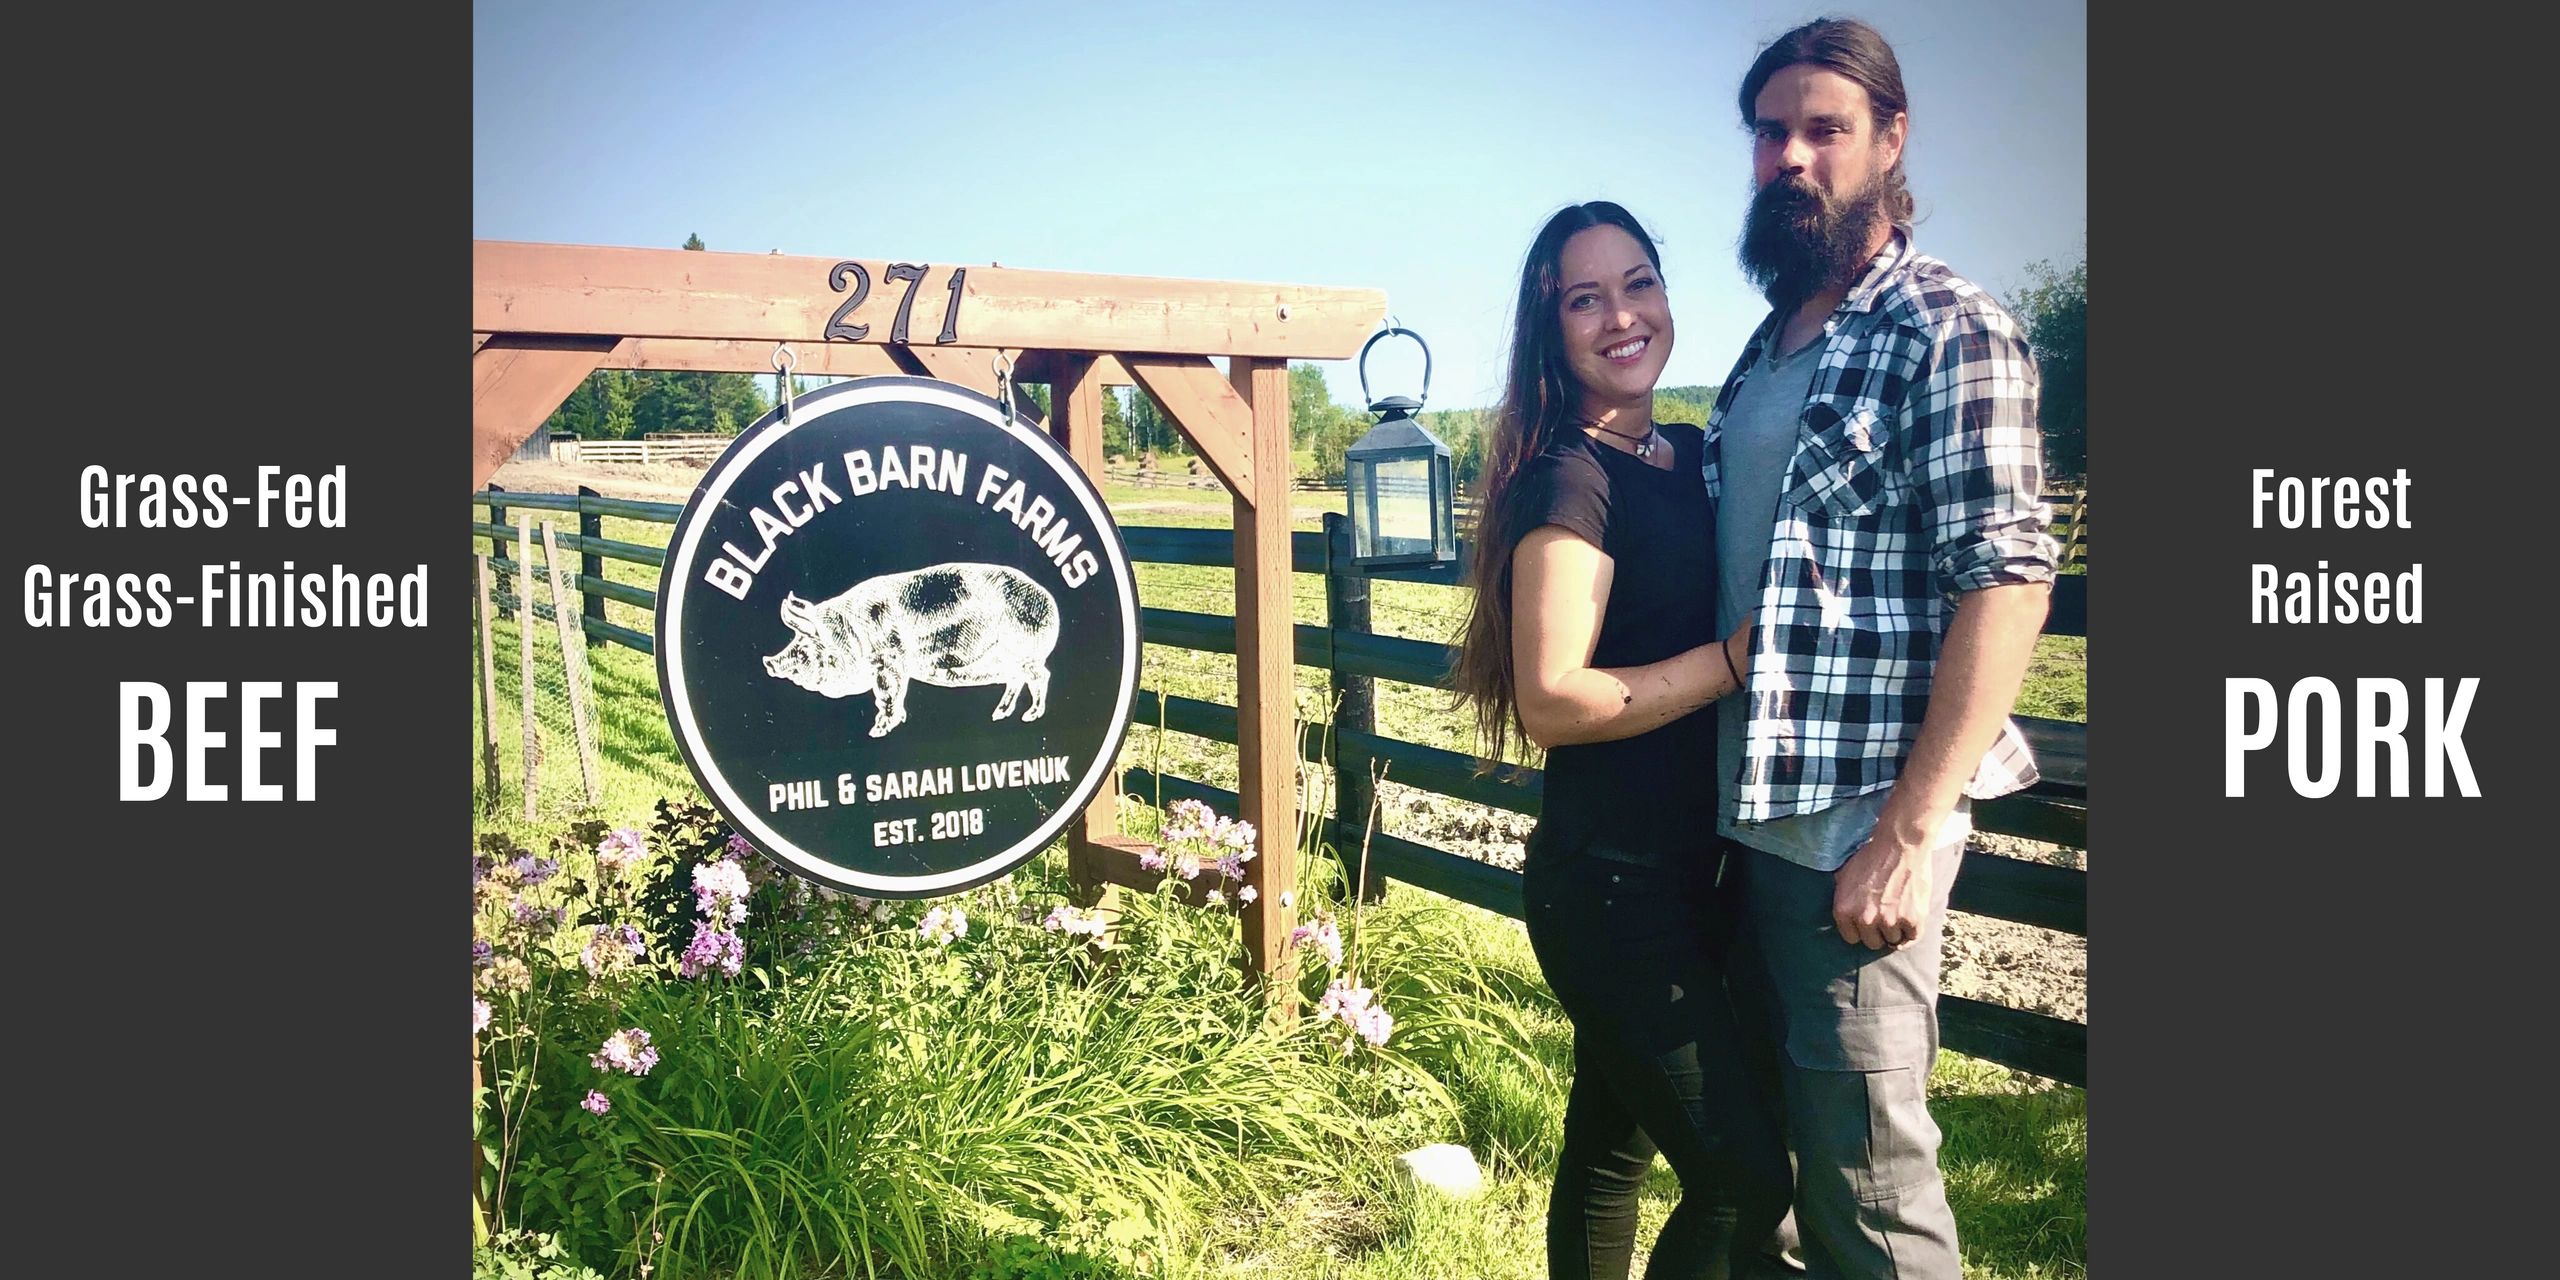 Black Barn Farm owners pose in front of the business sign and a black fence